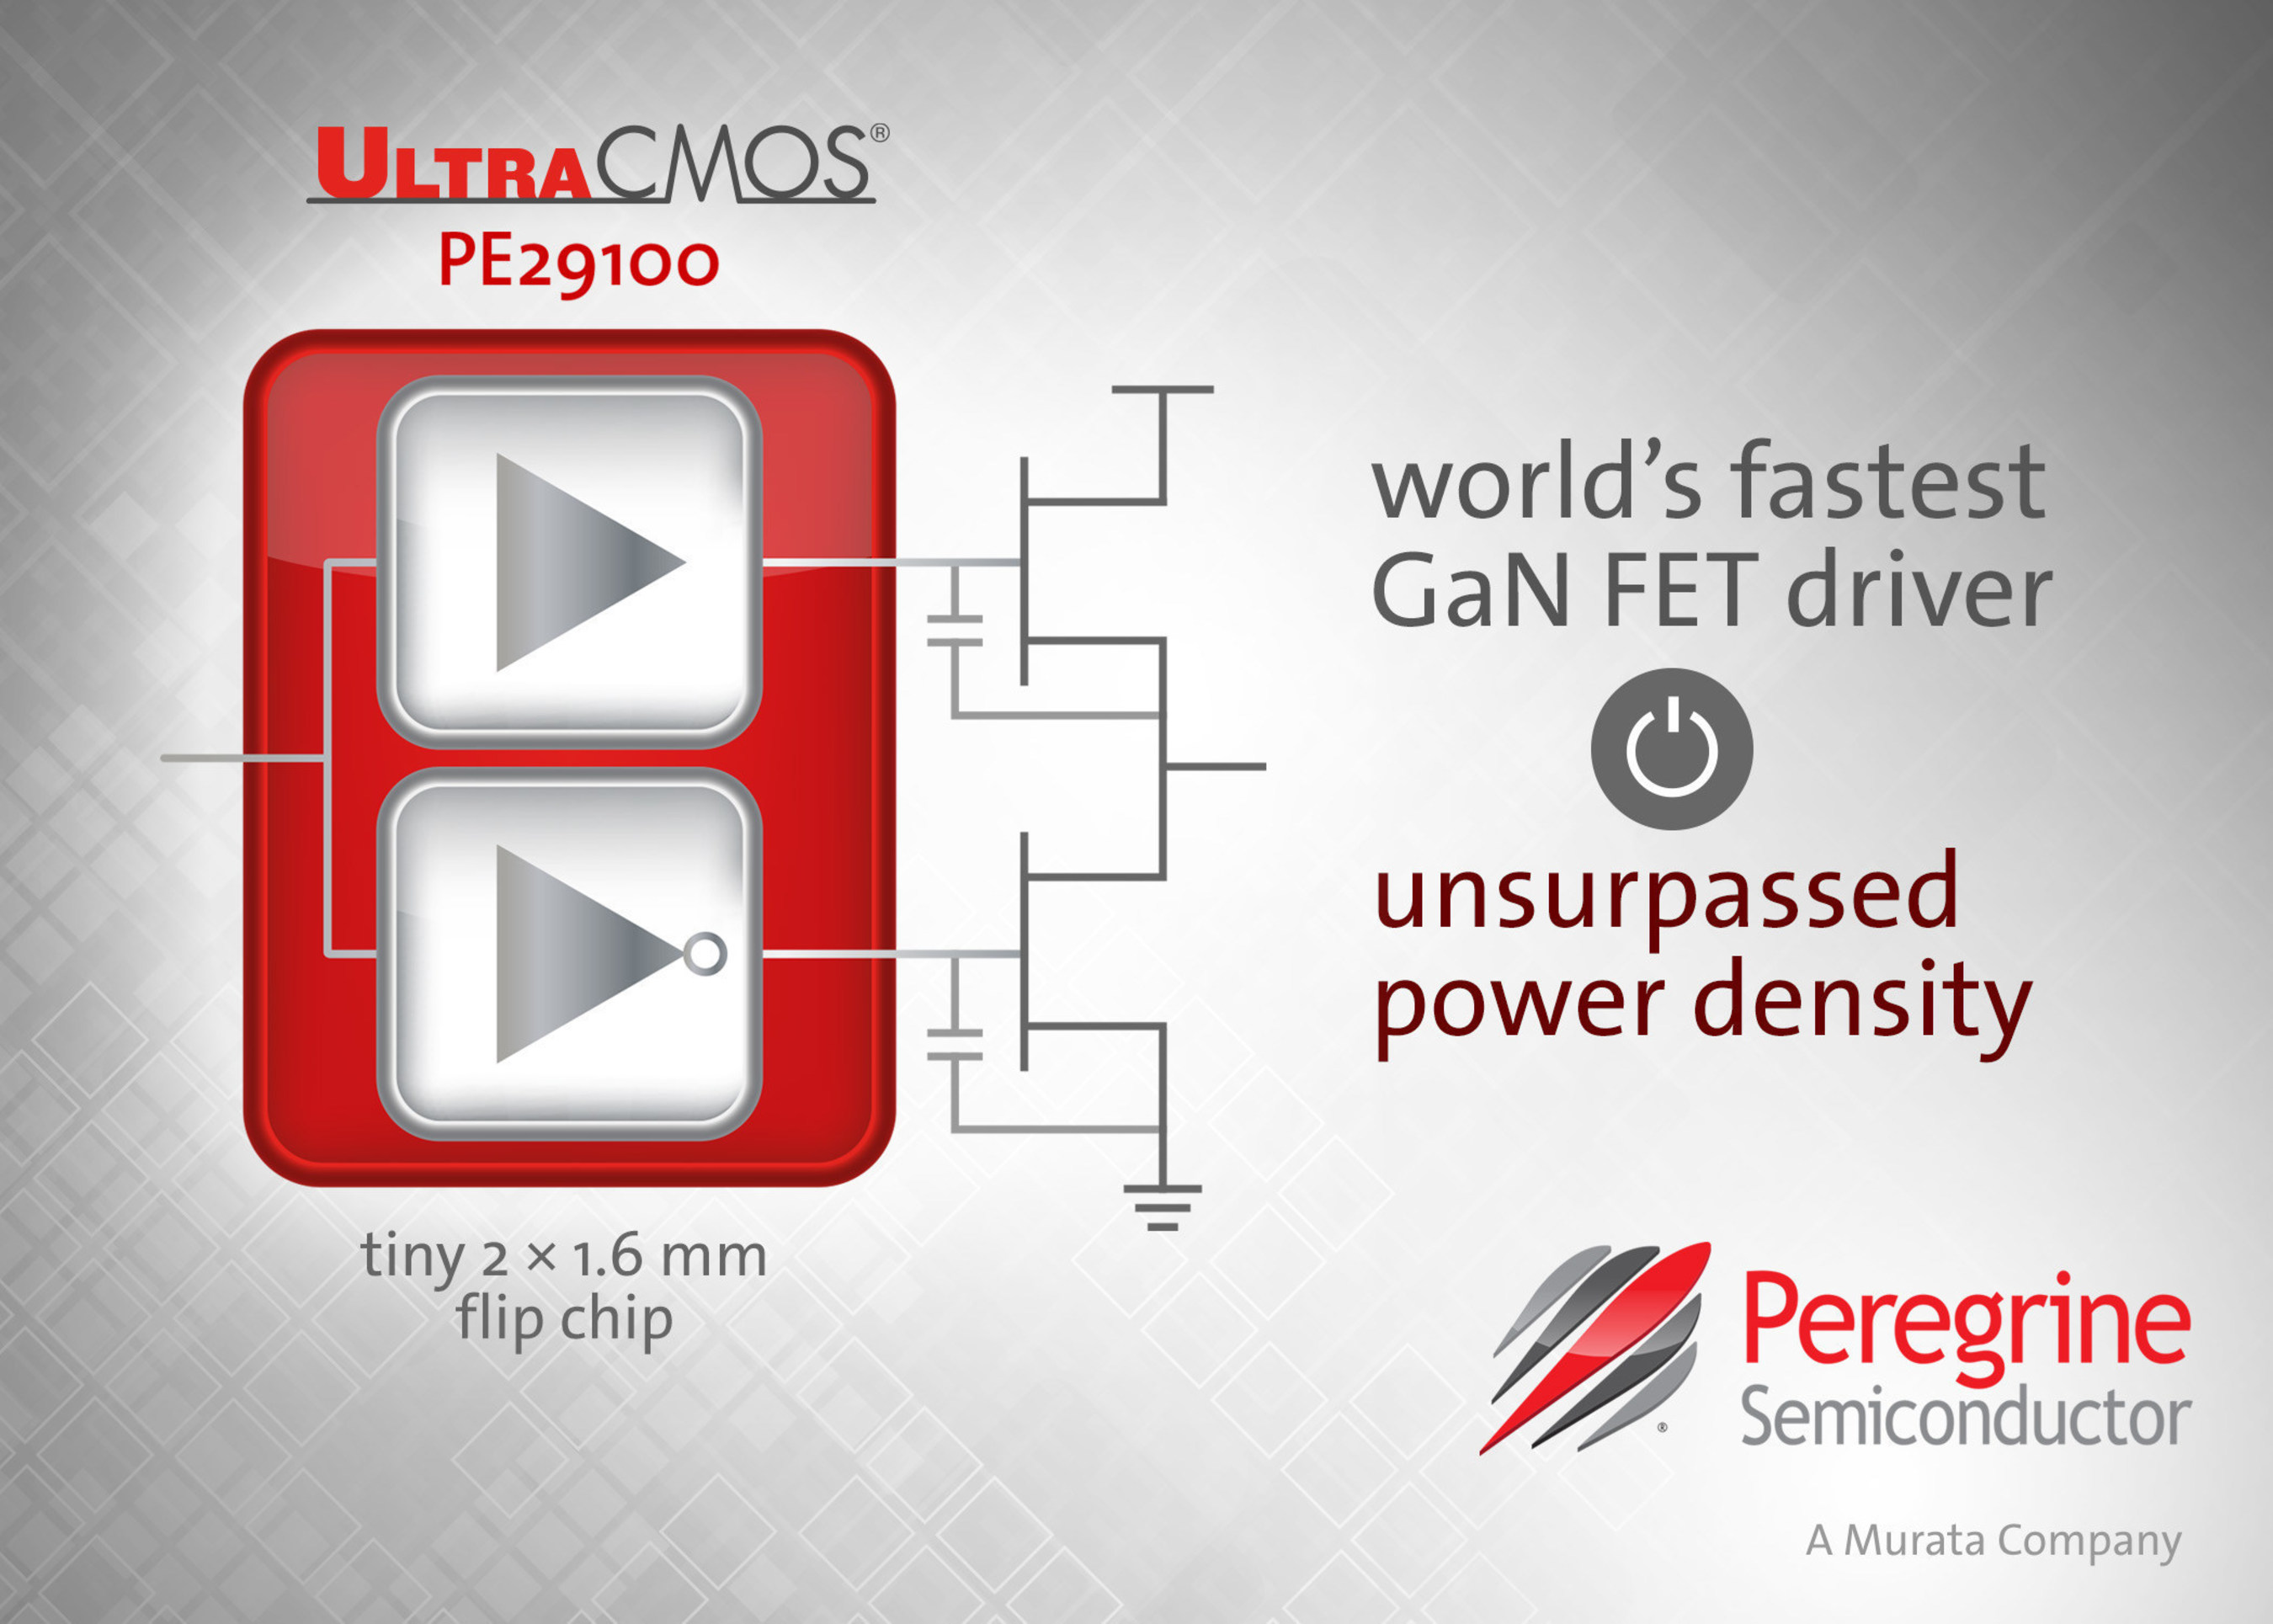 Built on Peregrine's UltraCMOS(R) technology, the PE29100 GaN FET driver empowers design engineers to extract the full performance and speed advantages from GaN transistors.